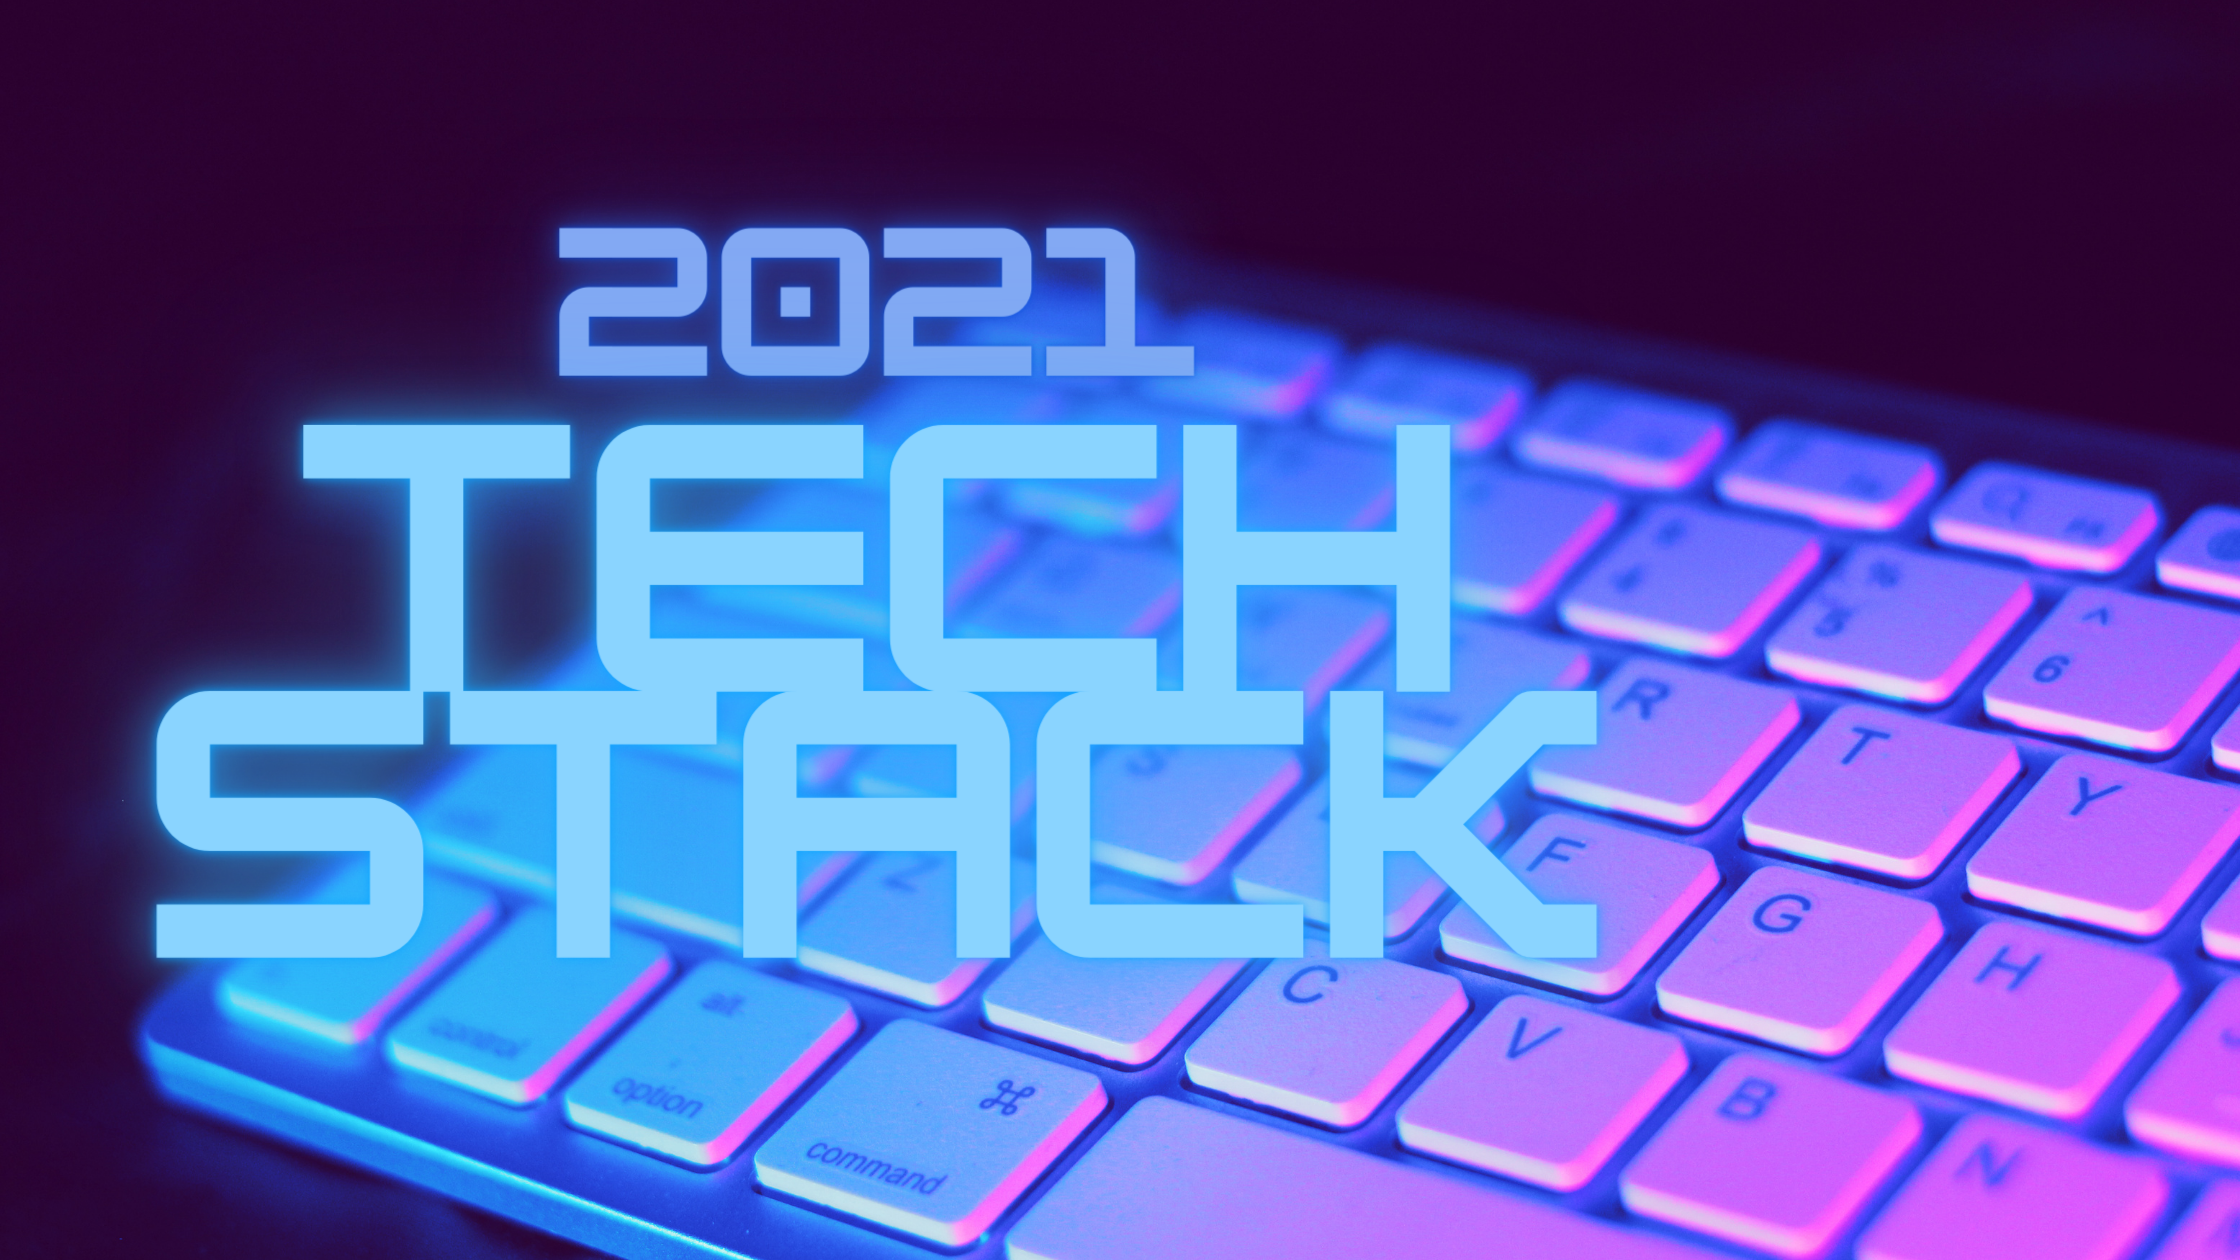 What's my tech stack in 2021?